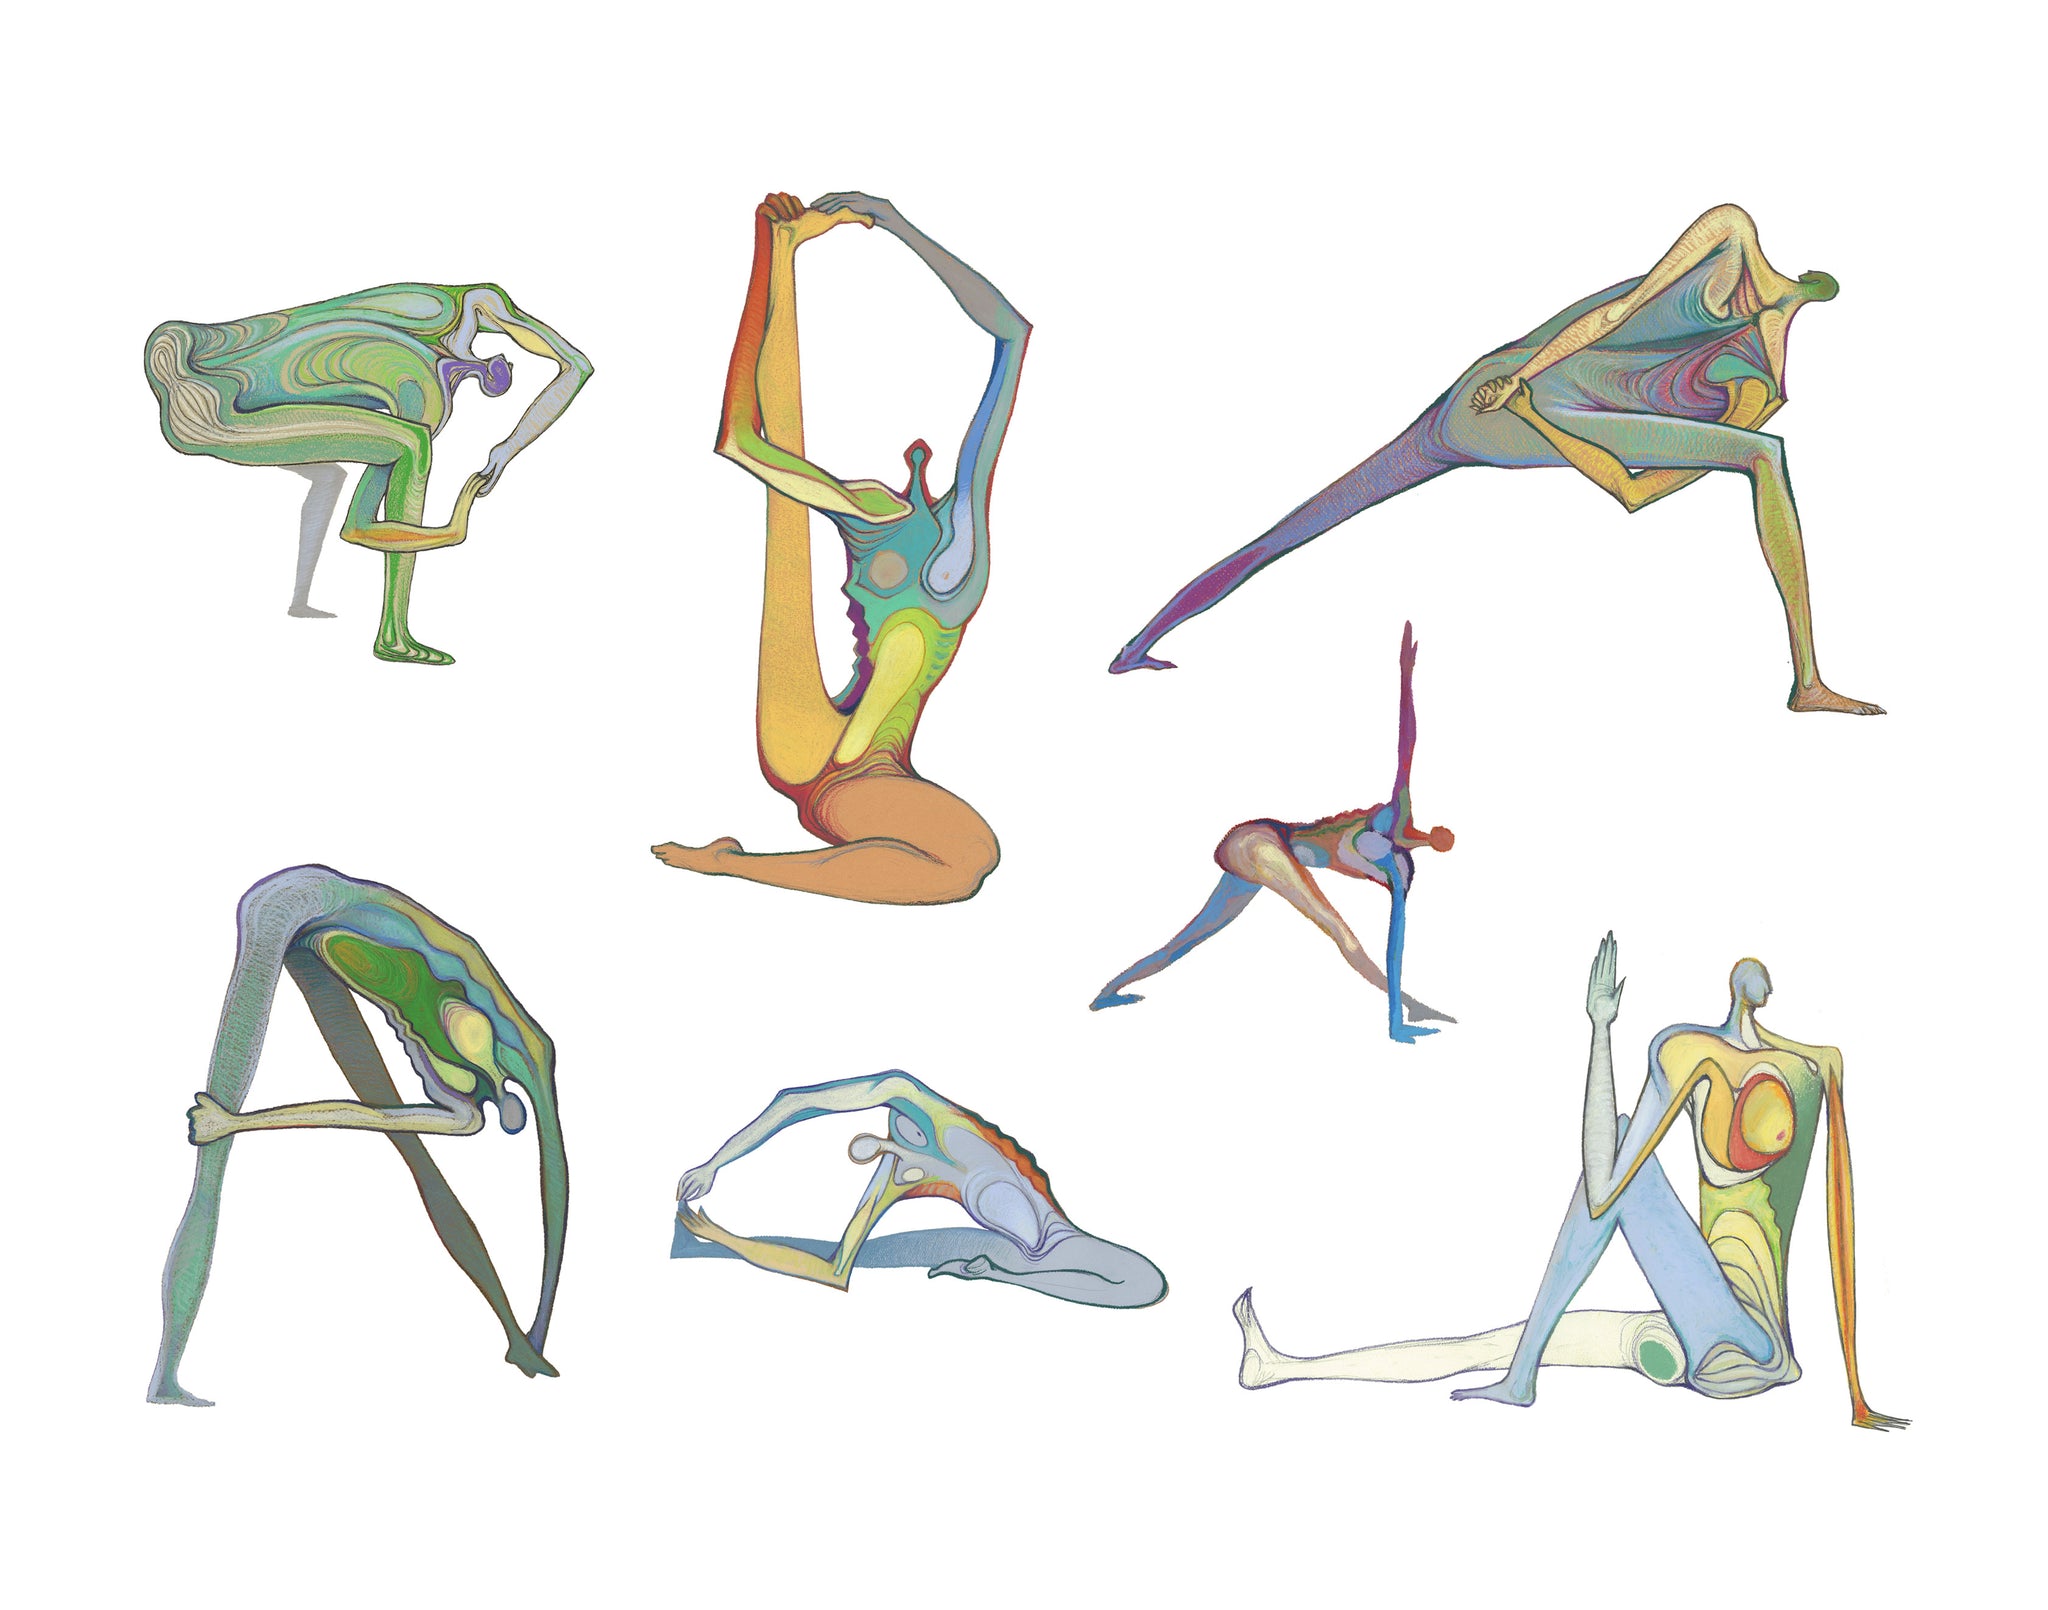 9,053 Asana Drawing Images, Stock Photos, 3D objects, & Vectors |  Shutterstock